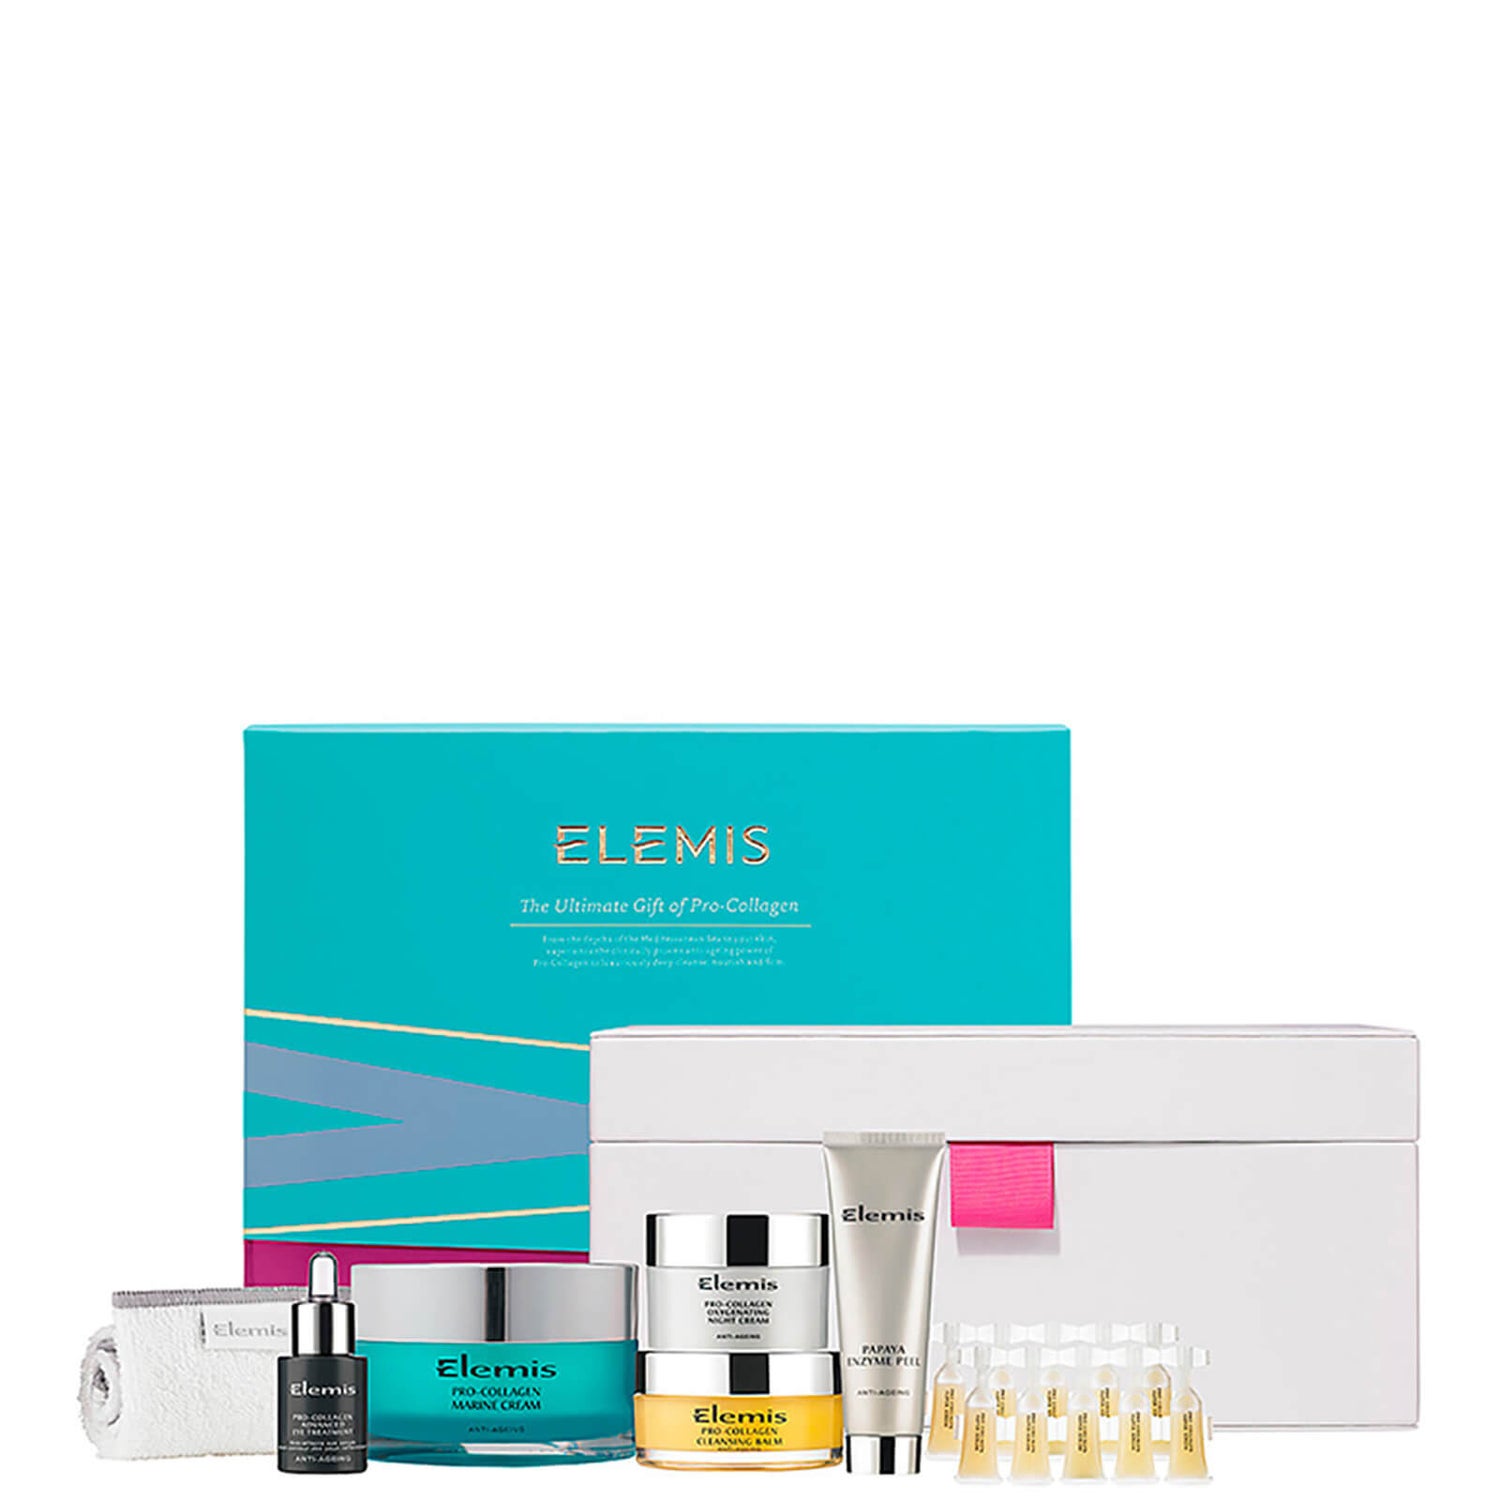 Elemis The Ultimate Gift Of Pro-Collagen (Worth $359.70)